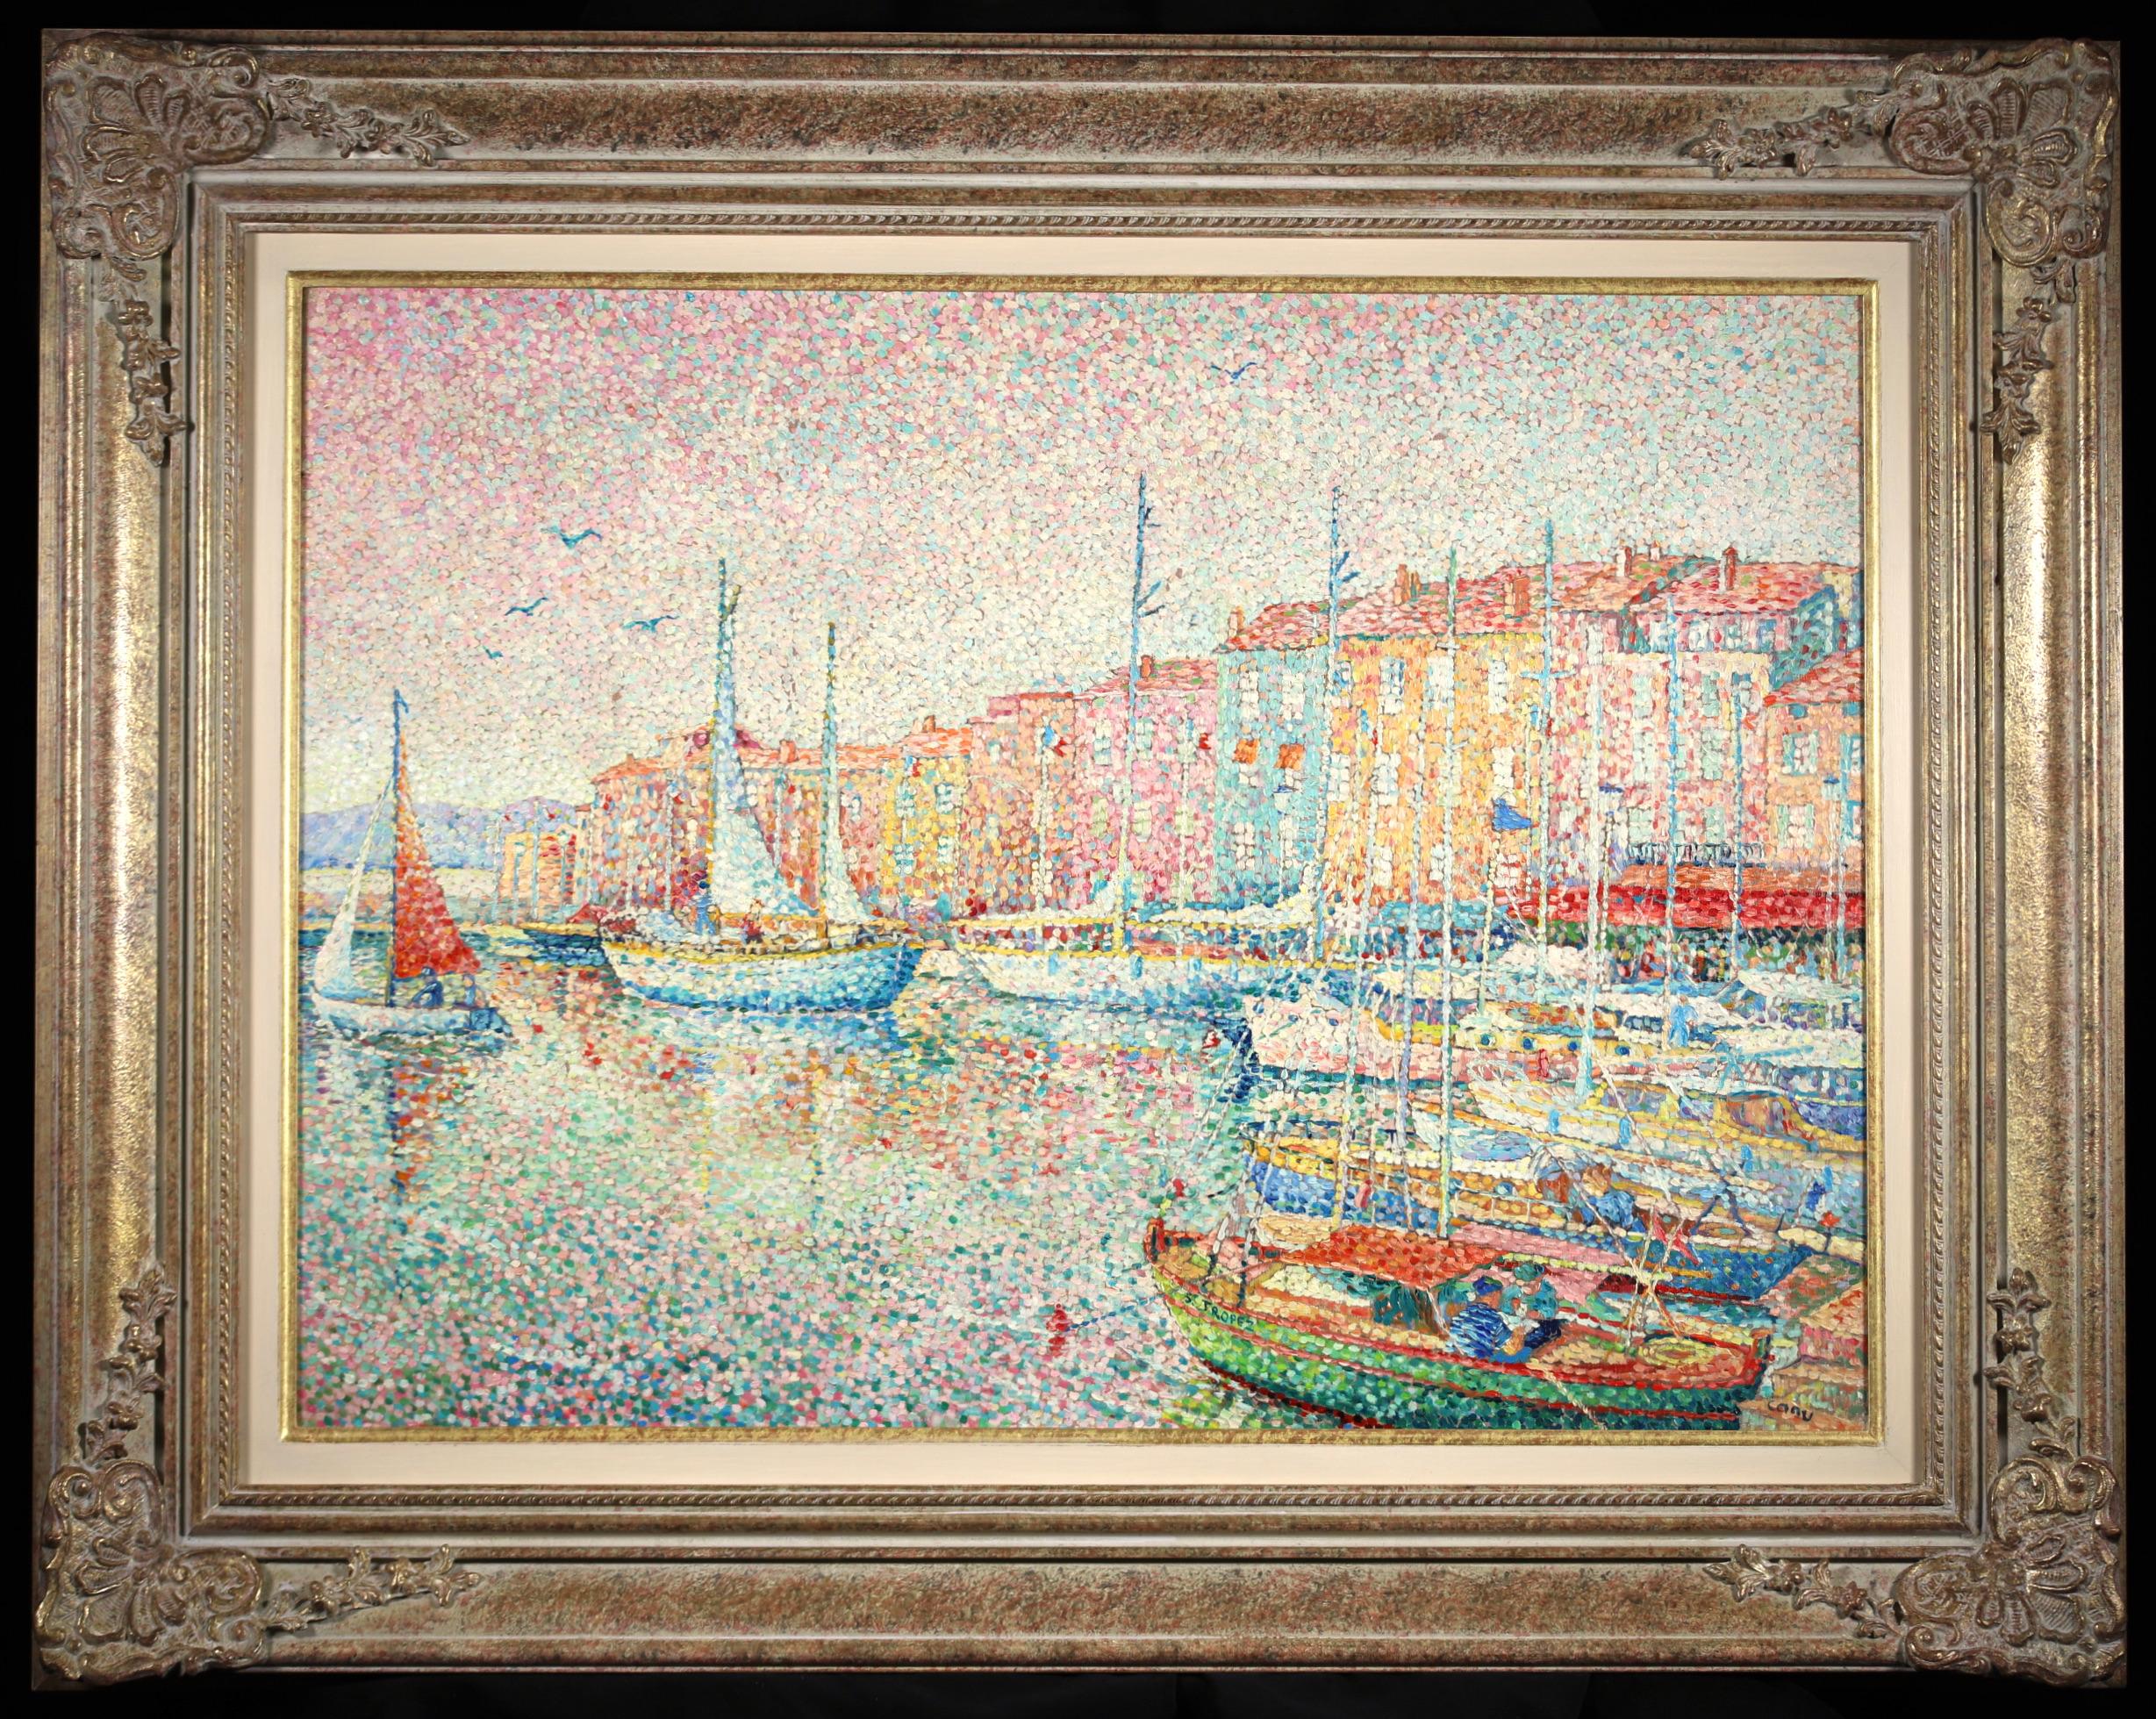 Signed and titled pointillist oil on cavas landscape by French painter Yvonne Canu. This stunning piece depicts boats moored at a harbour in Saint Tropez as the sun sets. There is a row of brightly painted houses behind the masts. A wonderful piece